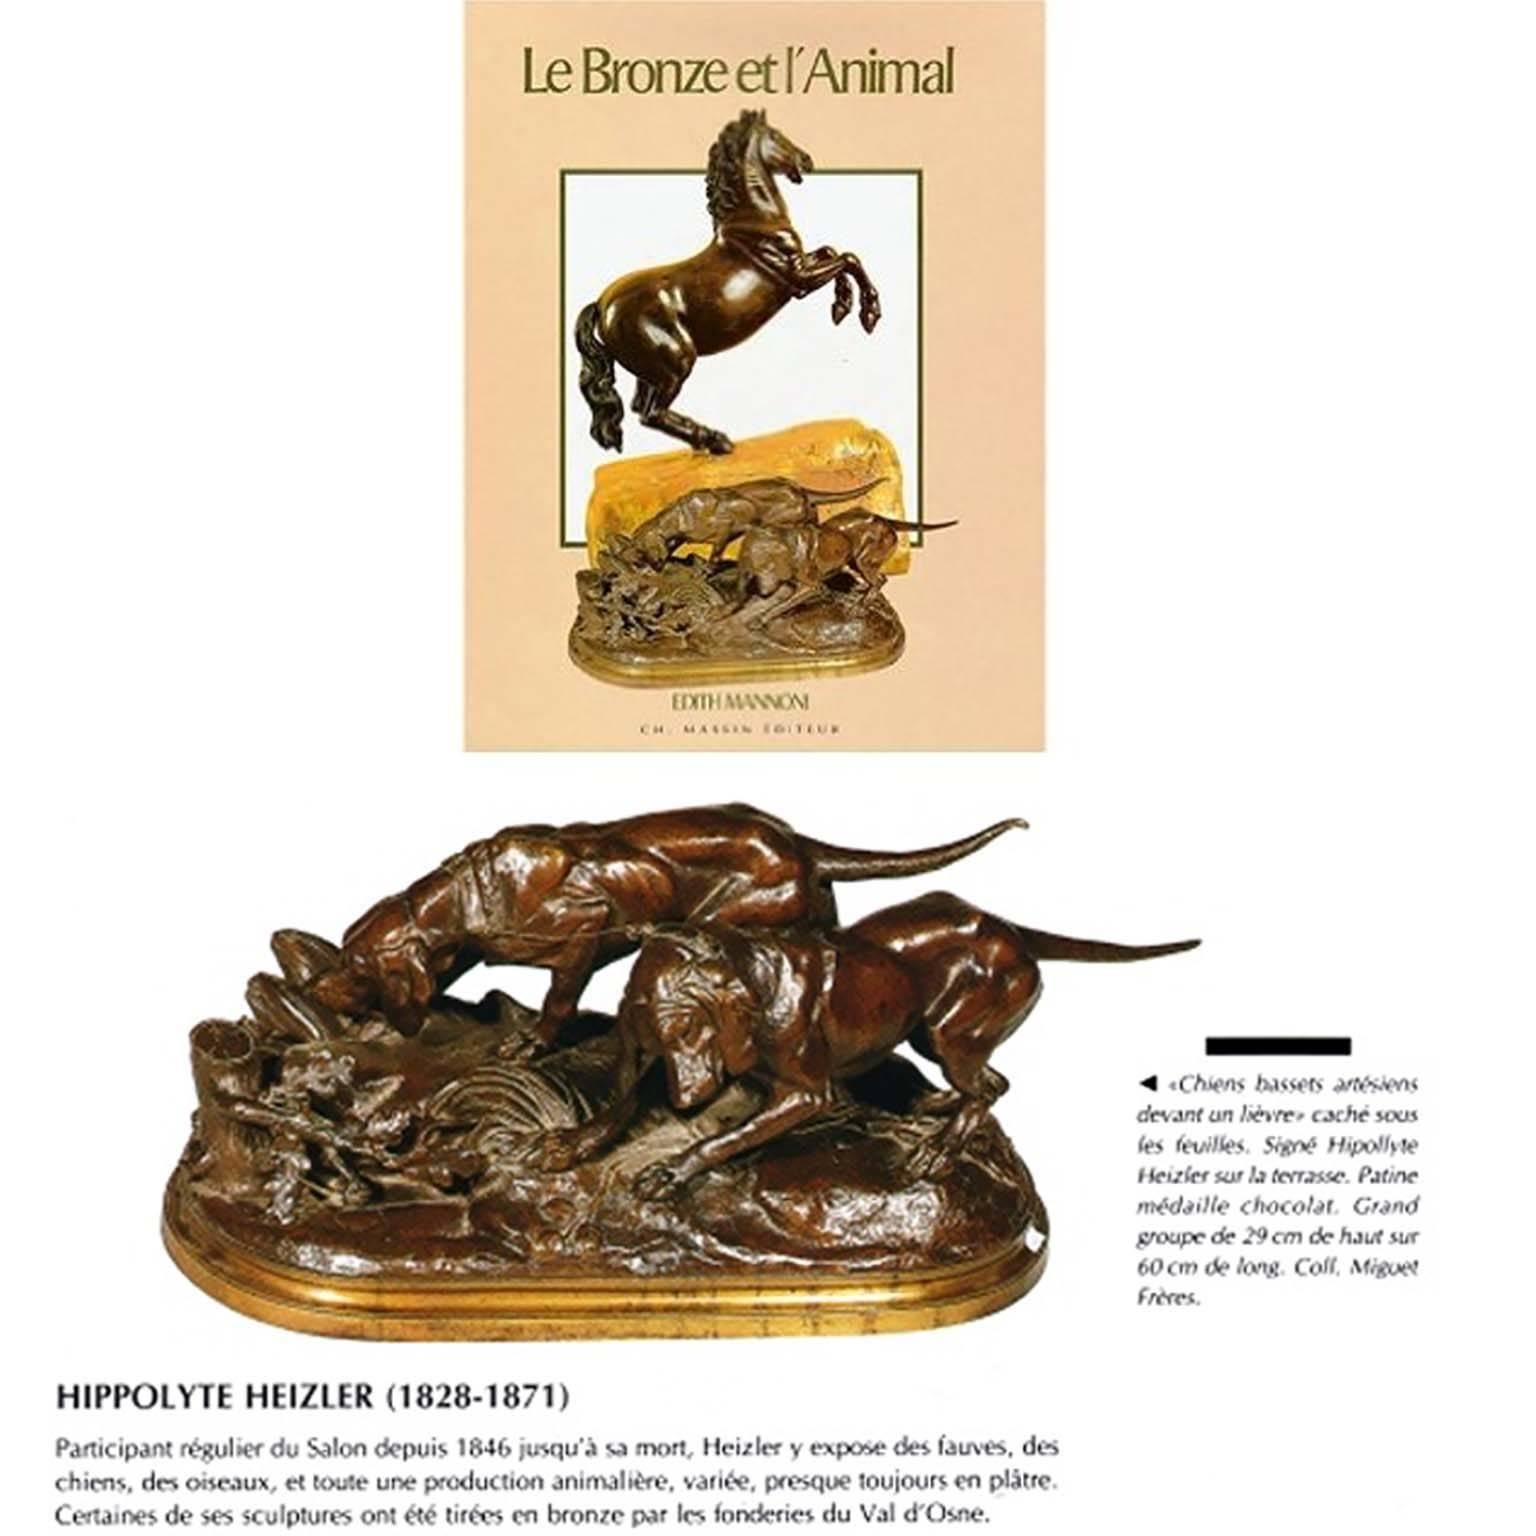 Hippolyte Heizler (1828–1871).
Two dogs standing in front of a hare hiding under the leaves.

Large bronze statuette with brown medal patina.
Molded oval base. Signed on the base 